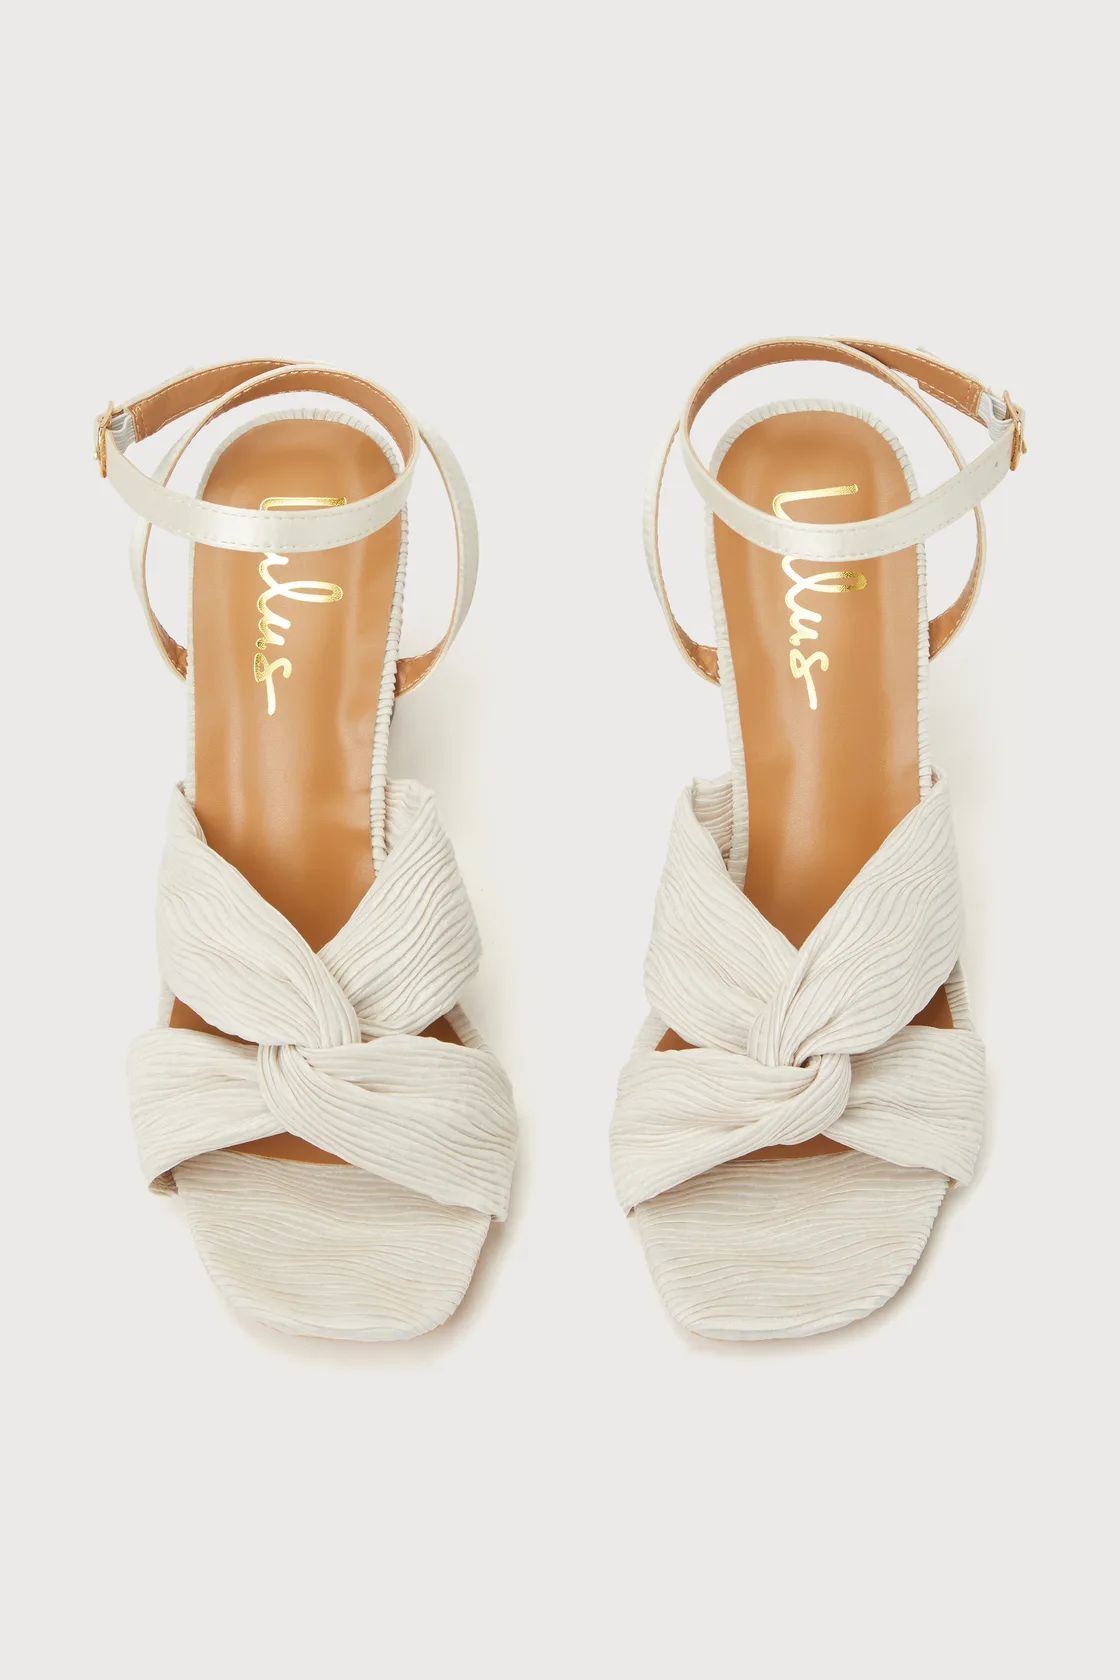 Doroknot Champagne Knotted Pleated High Heel Sandals | Lulus